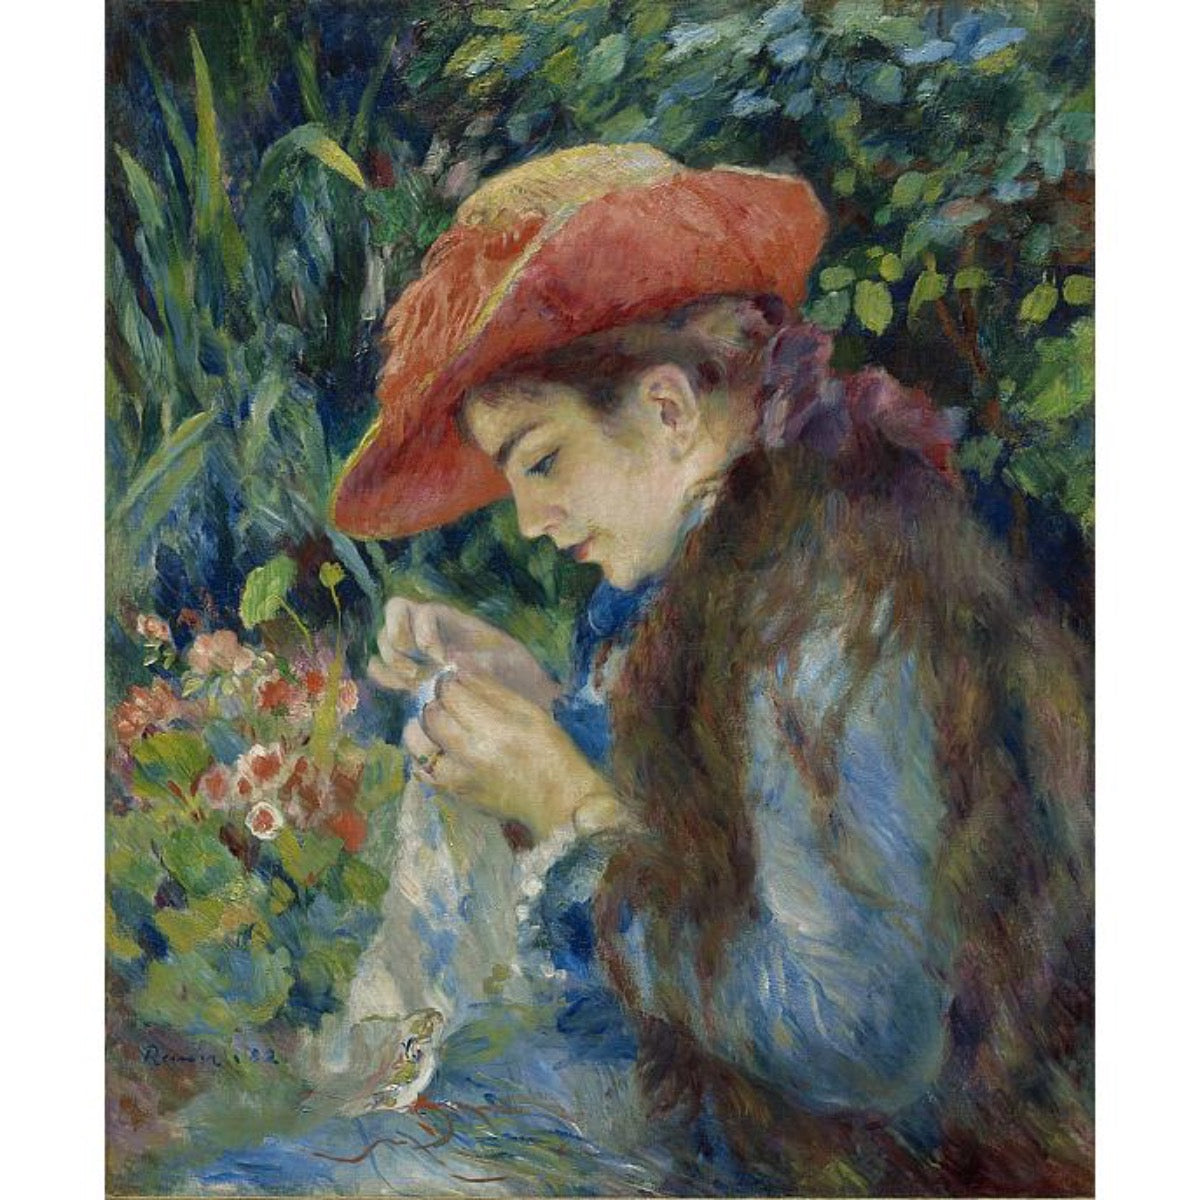 Pierre-Auguste Renoir, French, 1841-1919. Oil on canvas. Acquired by Sterling and Francine Clark, 1935